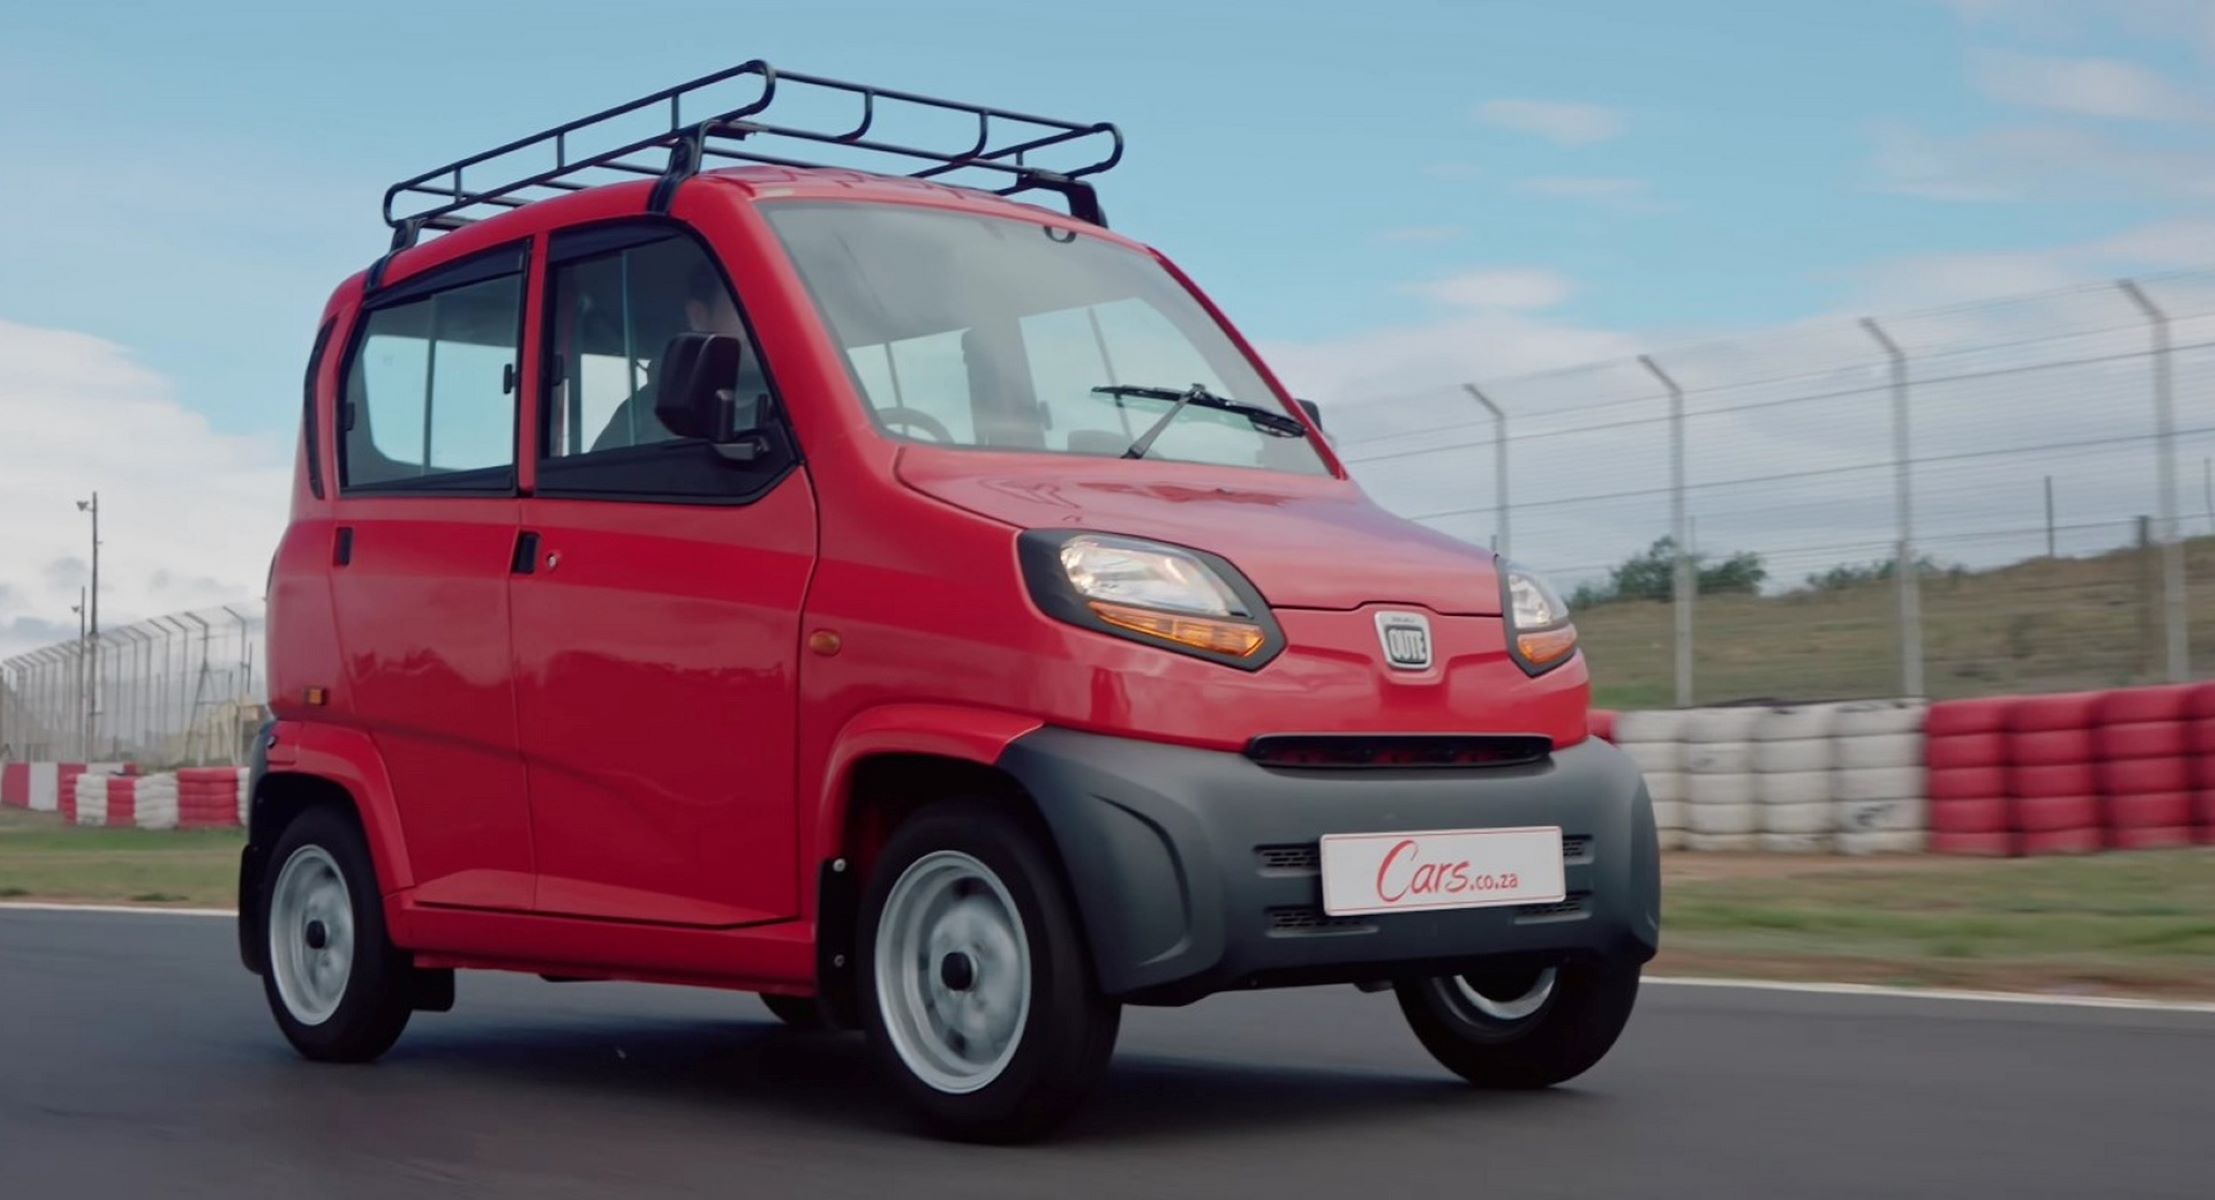 The World's Cheapest Car Revealed - You Won't Believe The Price!